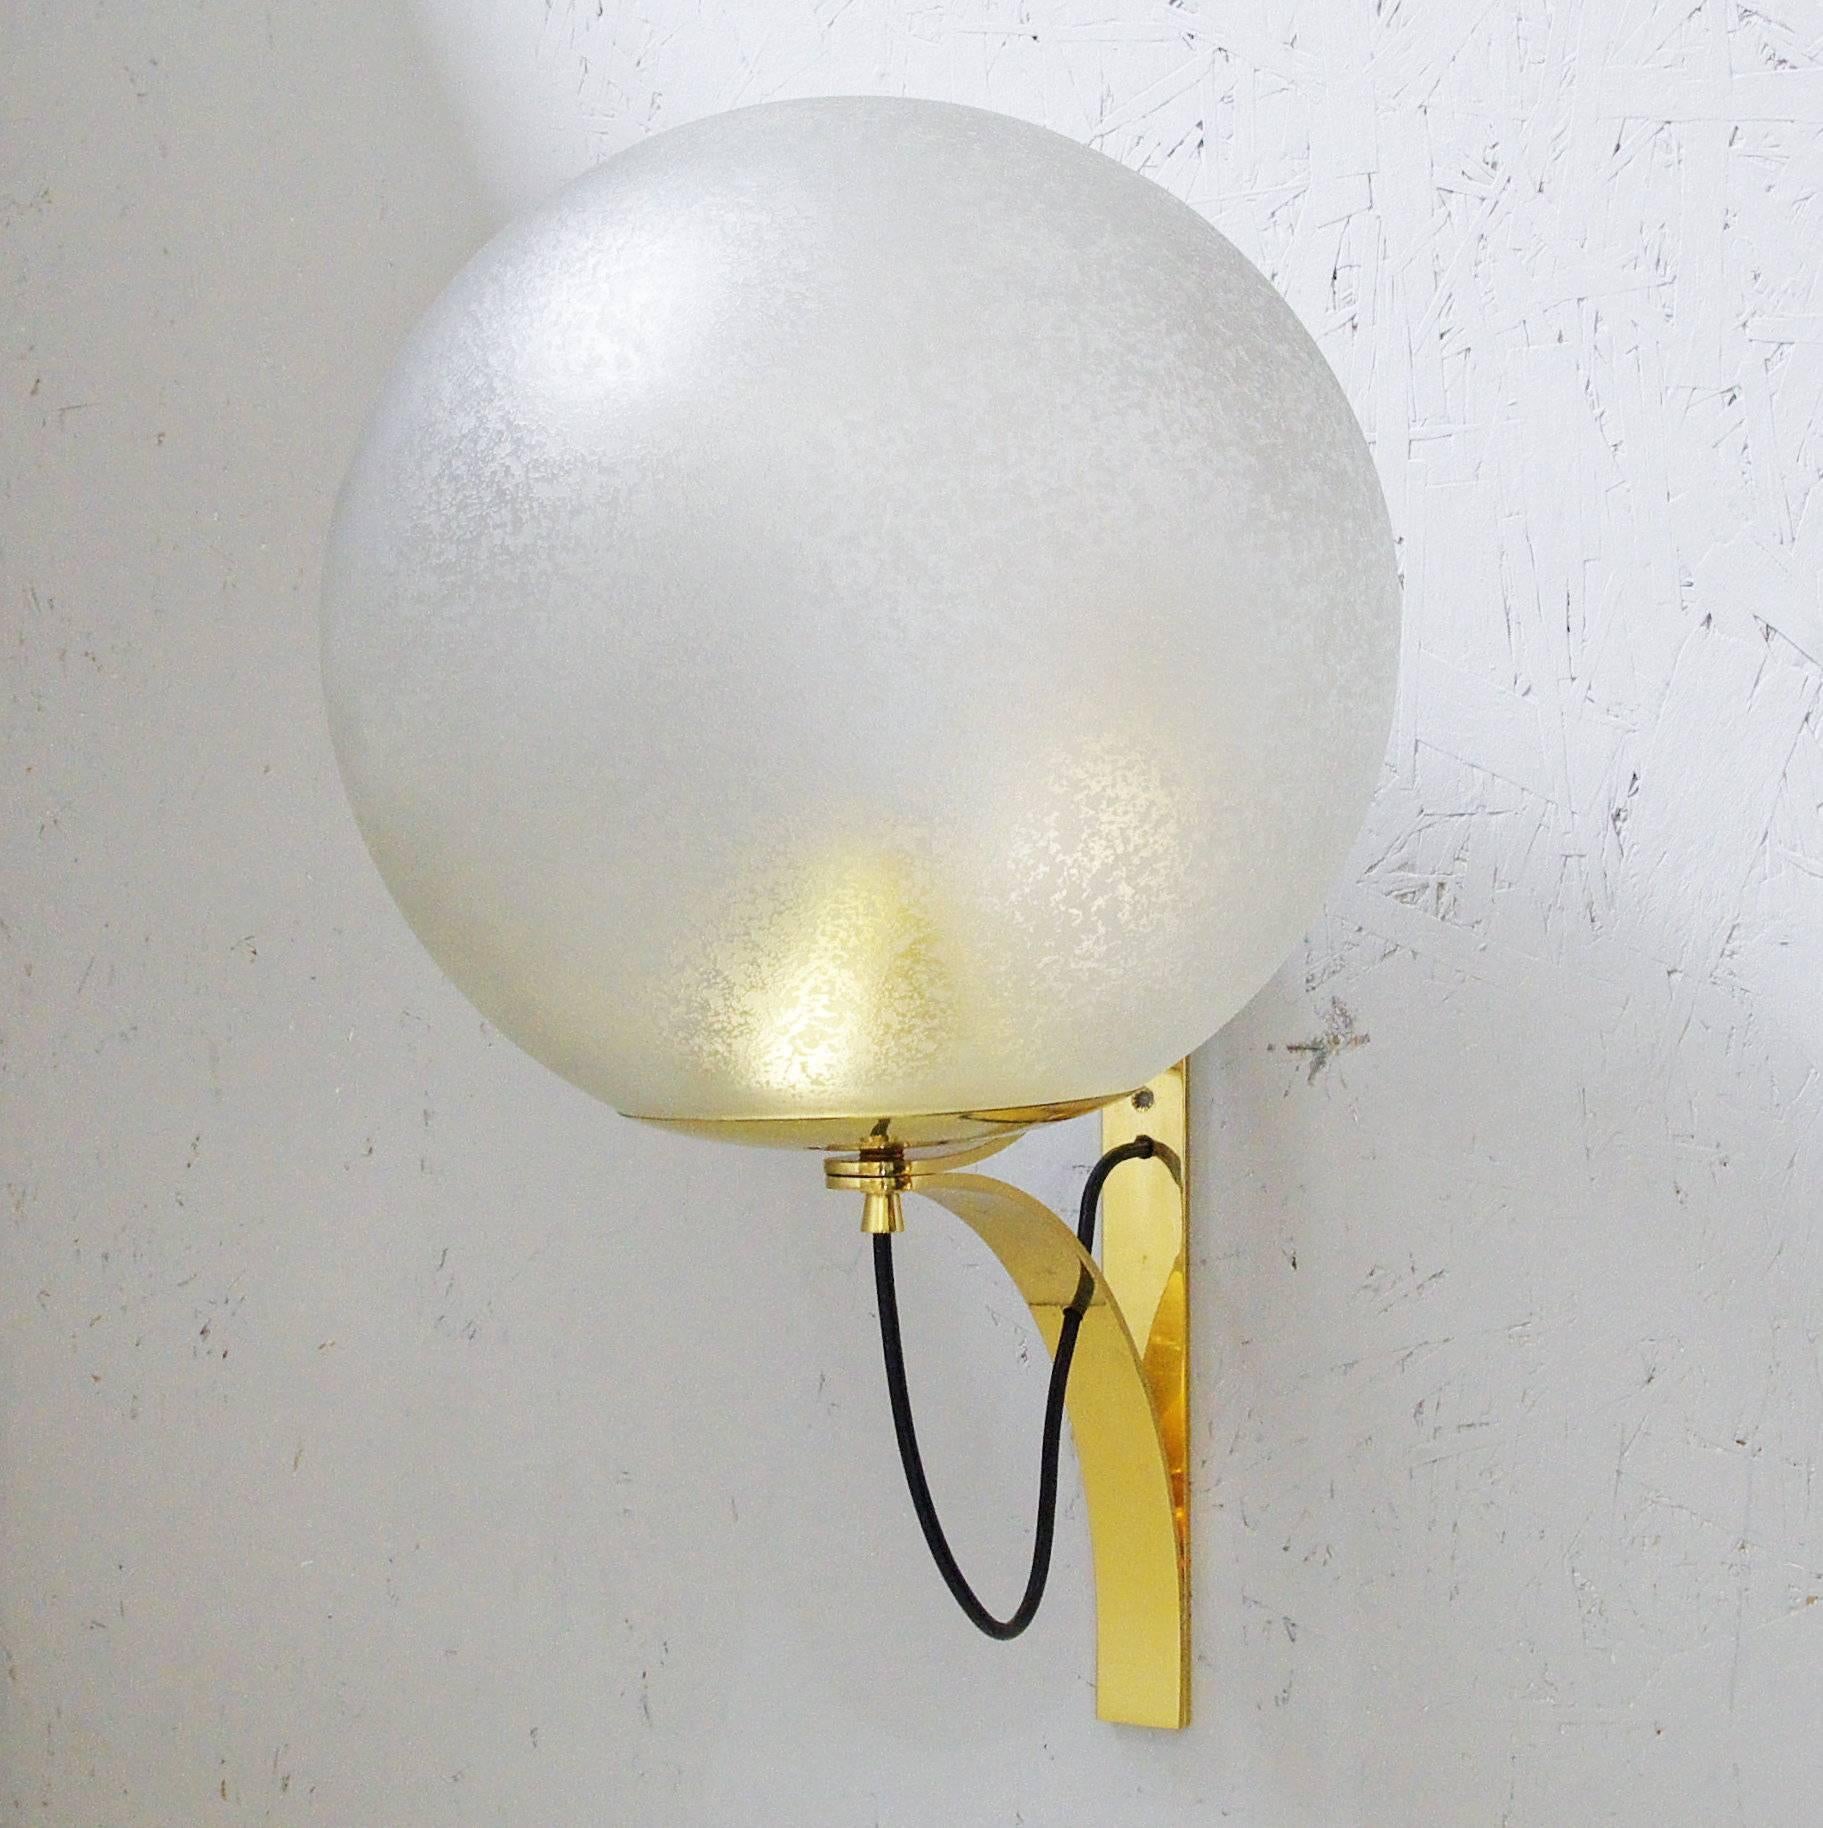 Vintage Italian wall lights with clear Murano glass globes with a beautiful etched frost using Acidato technique, mounted on solid brass brackets, by Seguso / Made in Italy in the 1960's
1 light E26 or E27 type max 60W 
Depth: 15 inches / Width: 13